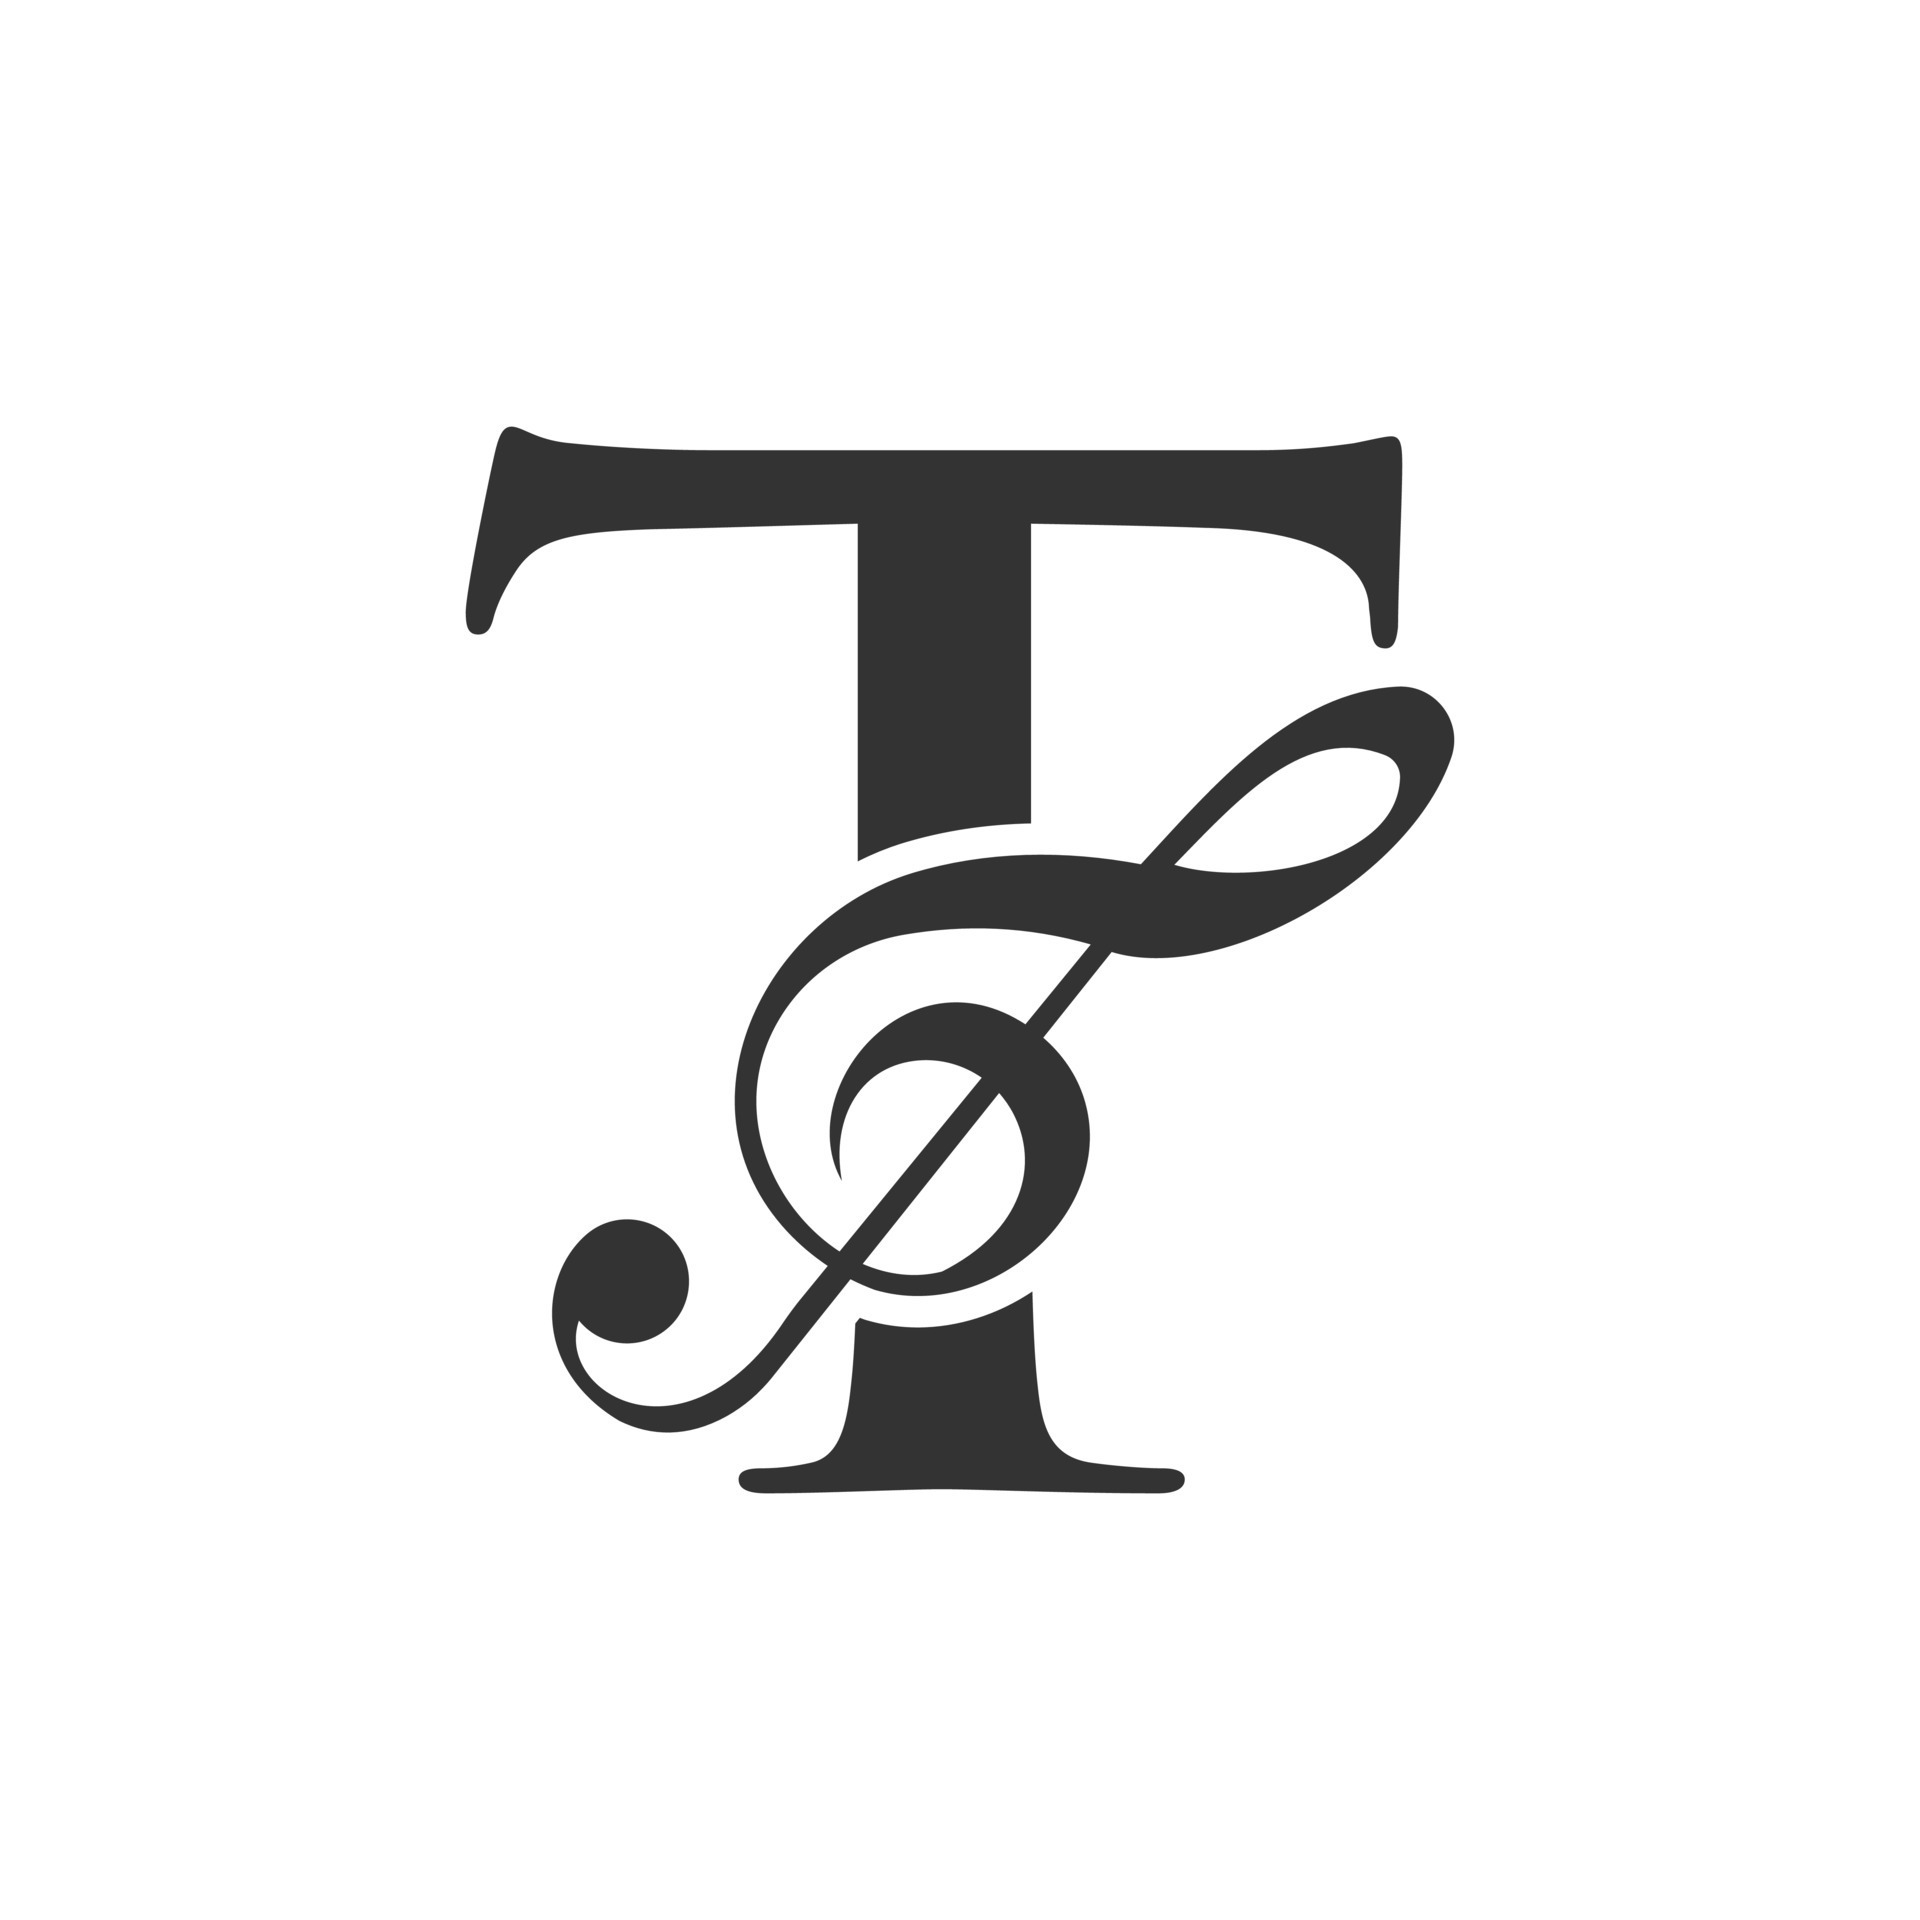 Music Logo On Letter T Concept. Music Note Sign, Sound Music Melody ...